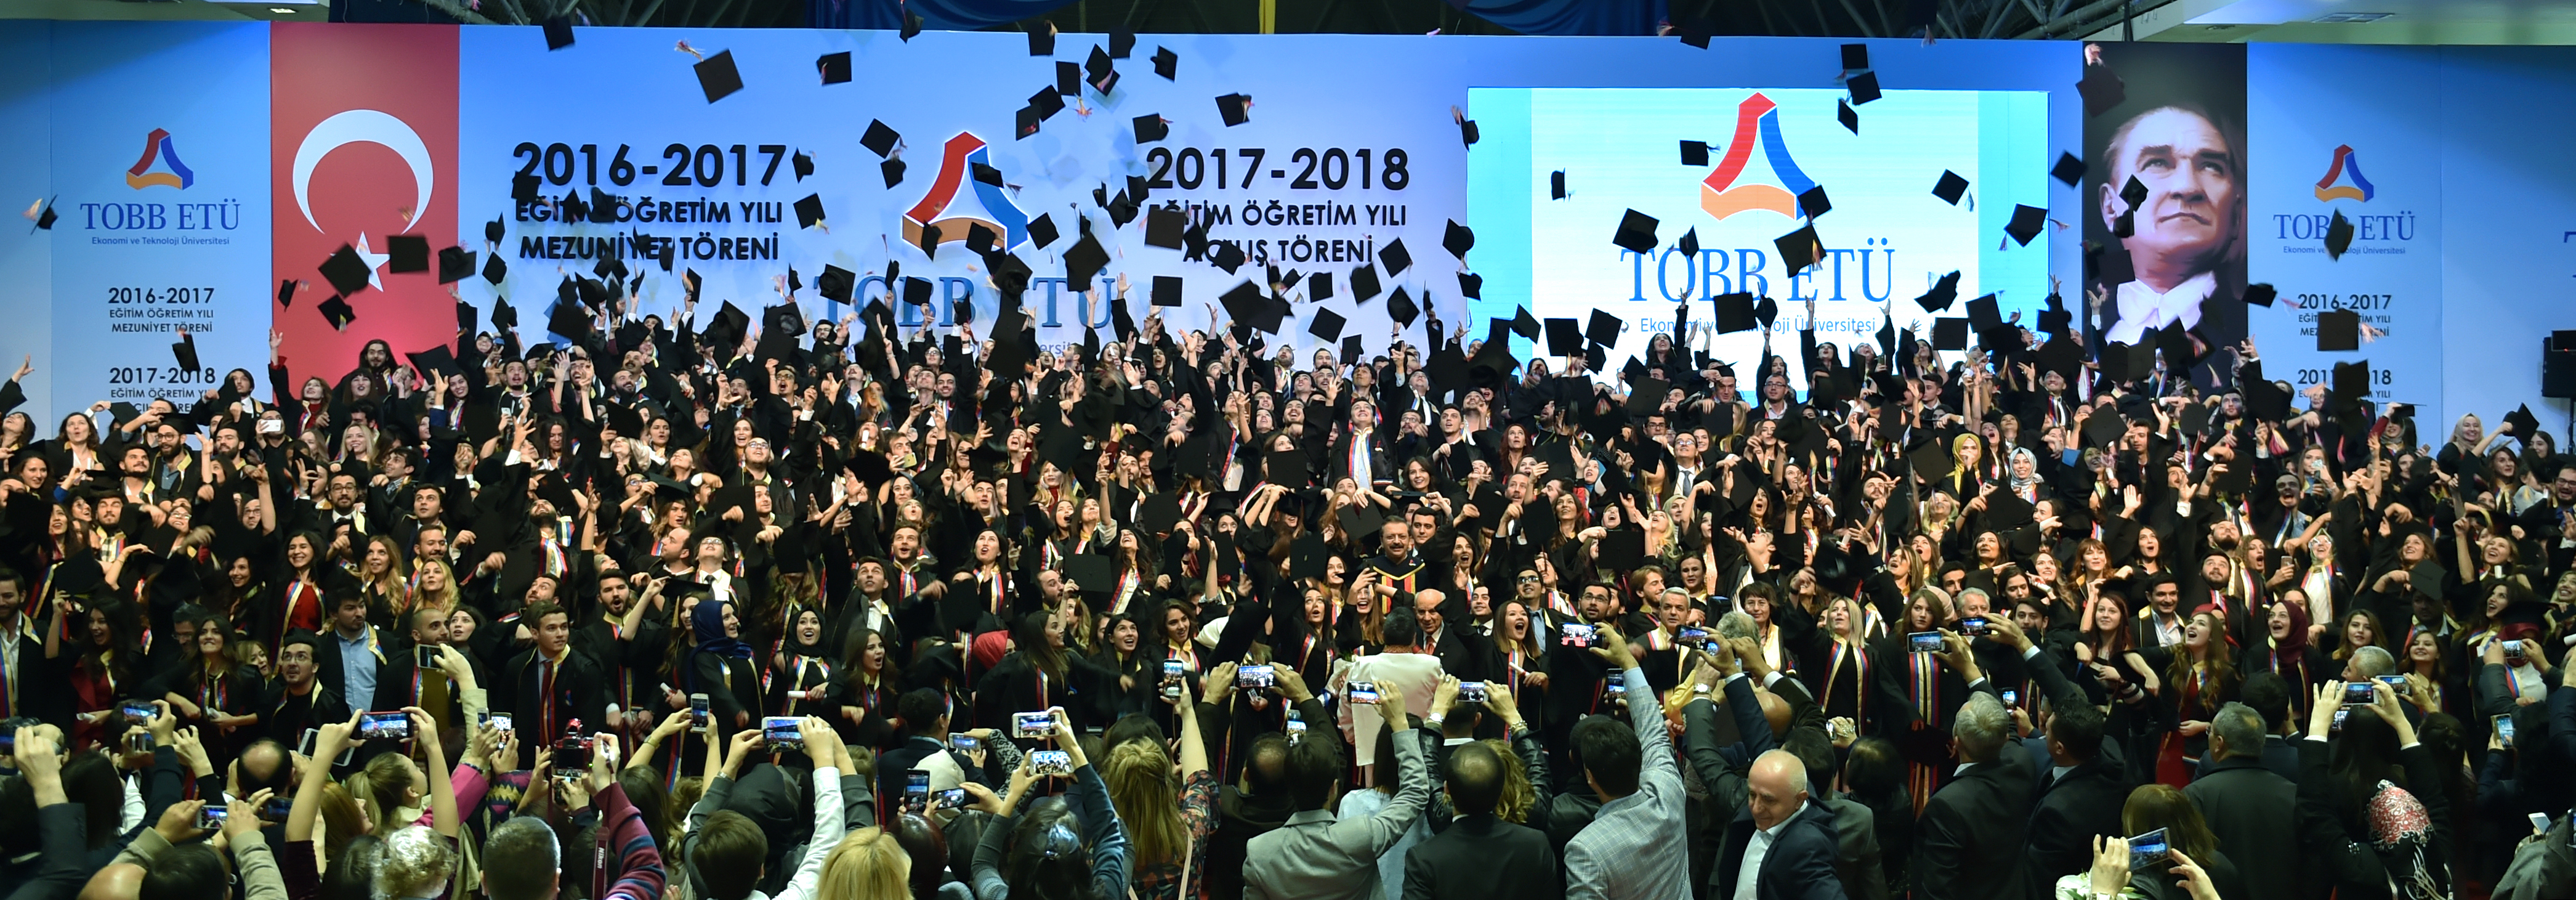 TOBB ETÜ Enjoys the Enthusiasm of the Graduation Ceremony for the Academic Year of 2016-2017 and the Inauguration Ceremony for the Academic Year of 2017-2018